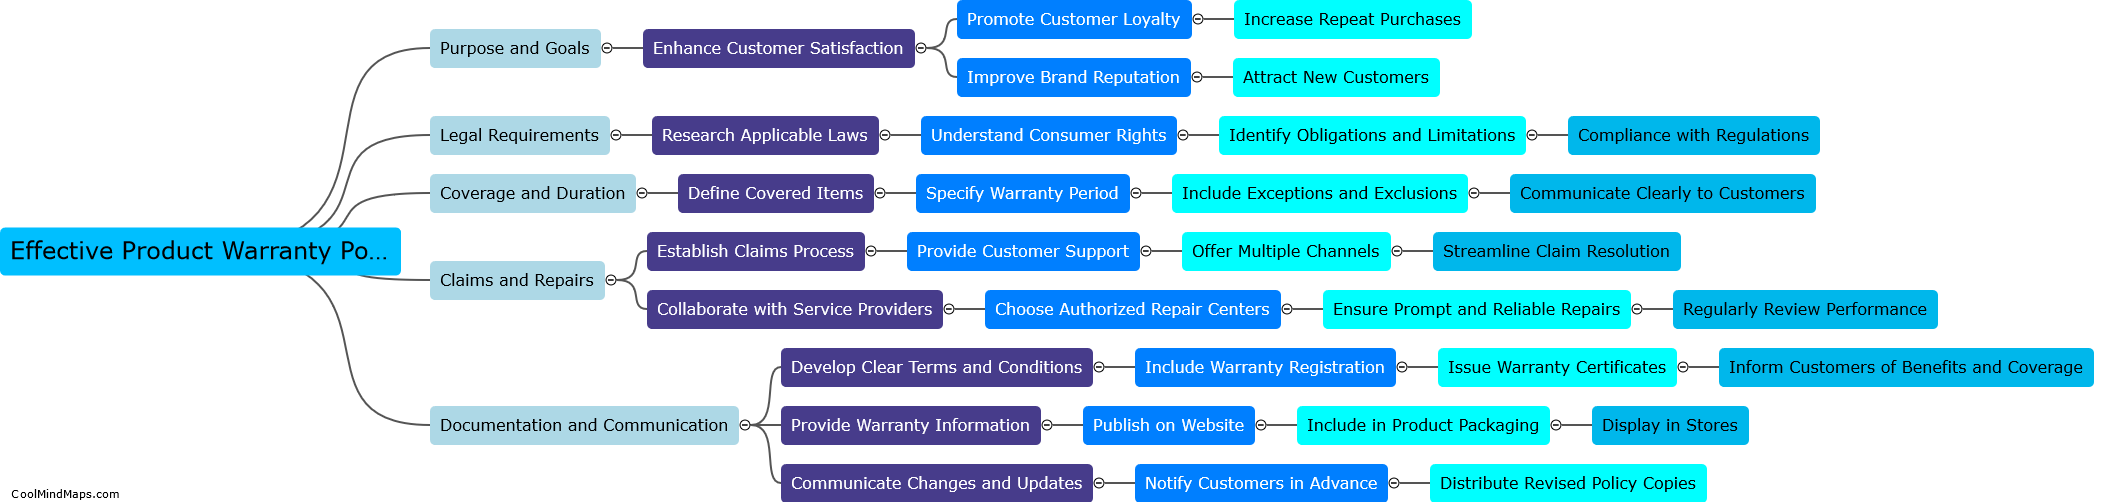 How to create an effective product warranty policy?